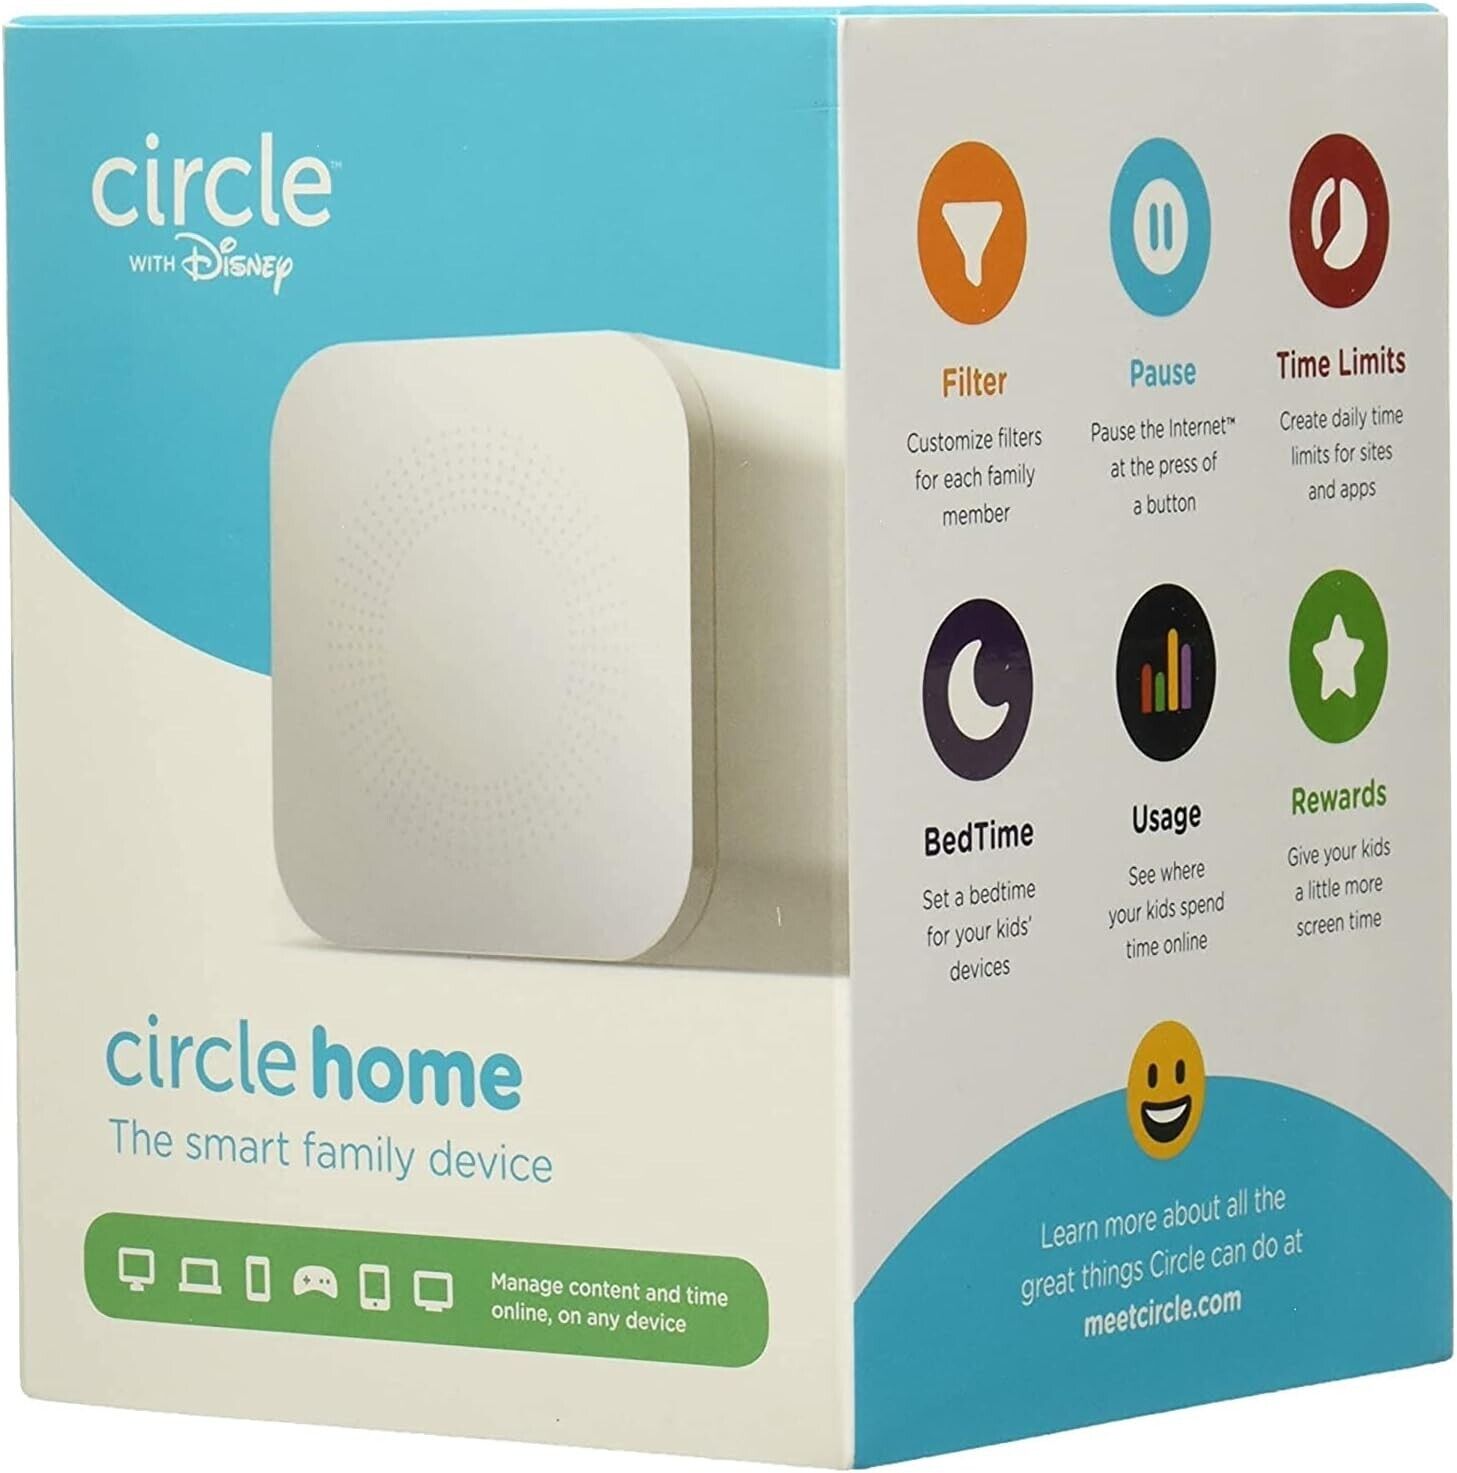 Circle with Disney - Parental Controls and Filters for your Family’s Devices